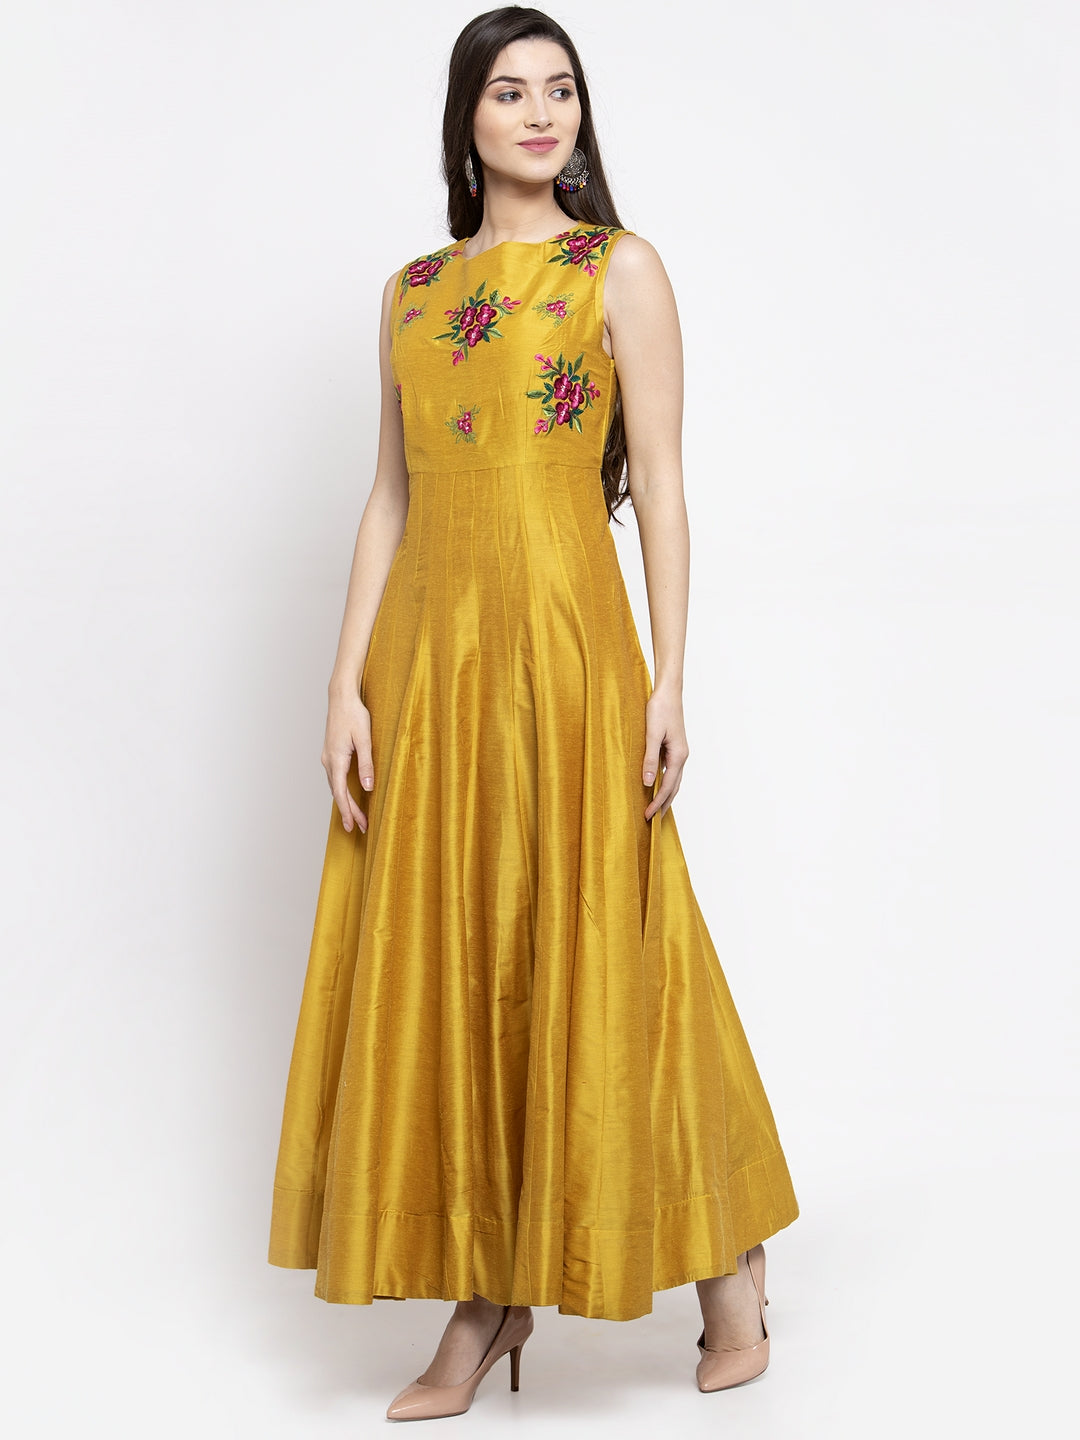 Women's Mustrad Yellow Foral Ethnic Maxi Dress - Final Clearance Sale